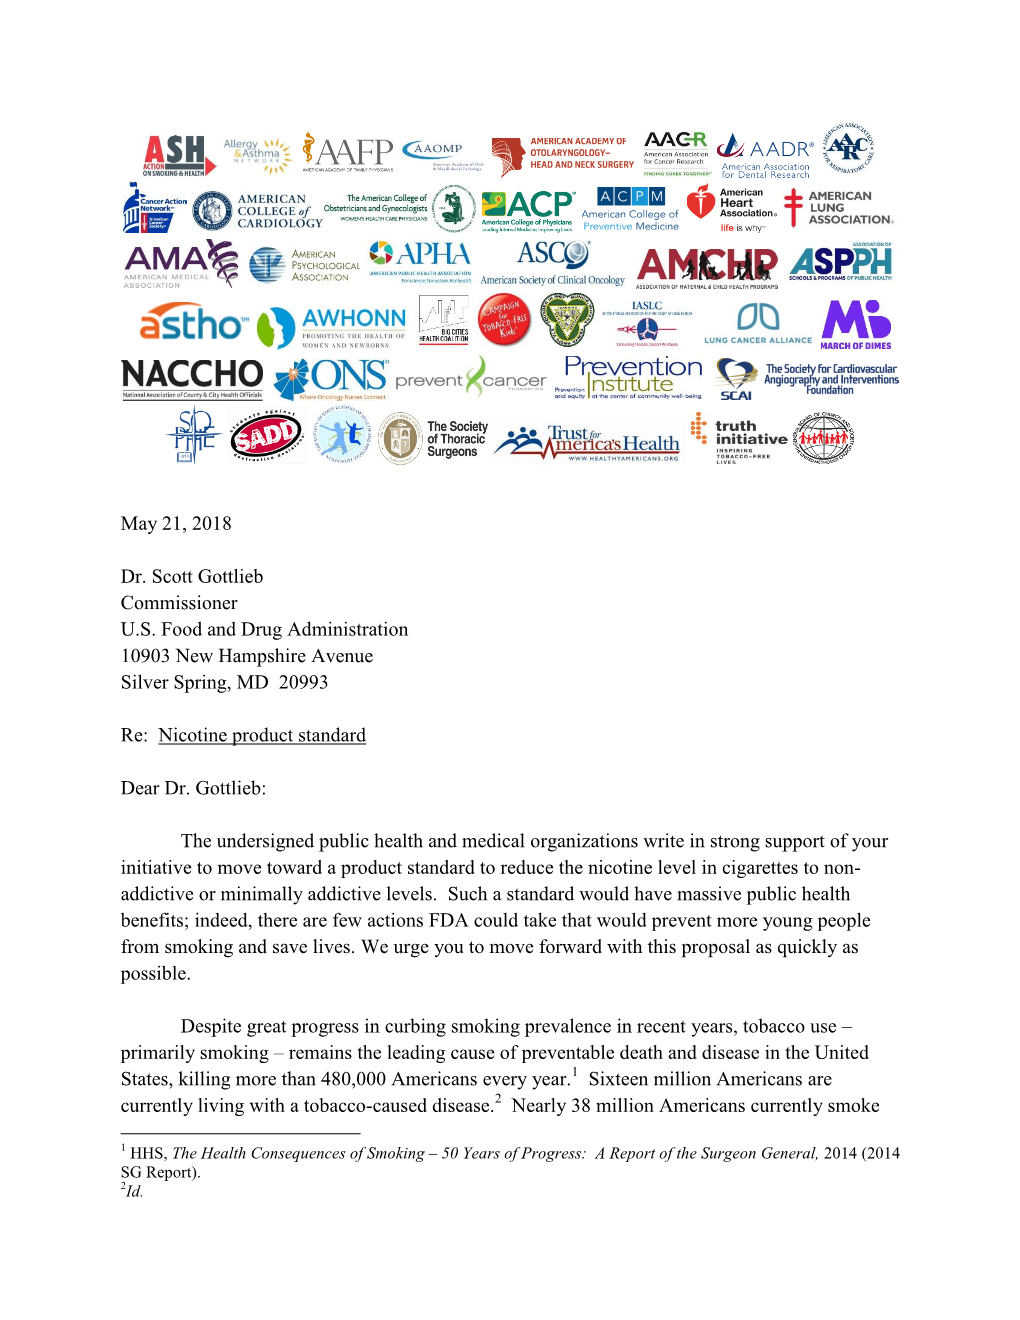 AAFP Letter to the FDA on the Nicotine Product Standard